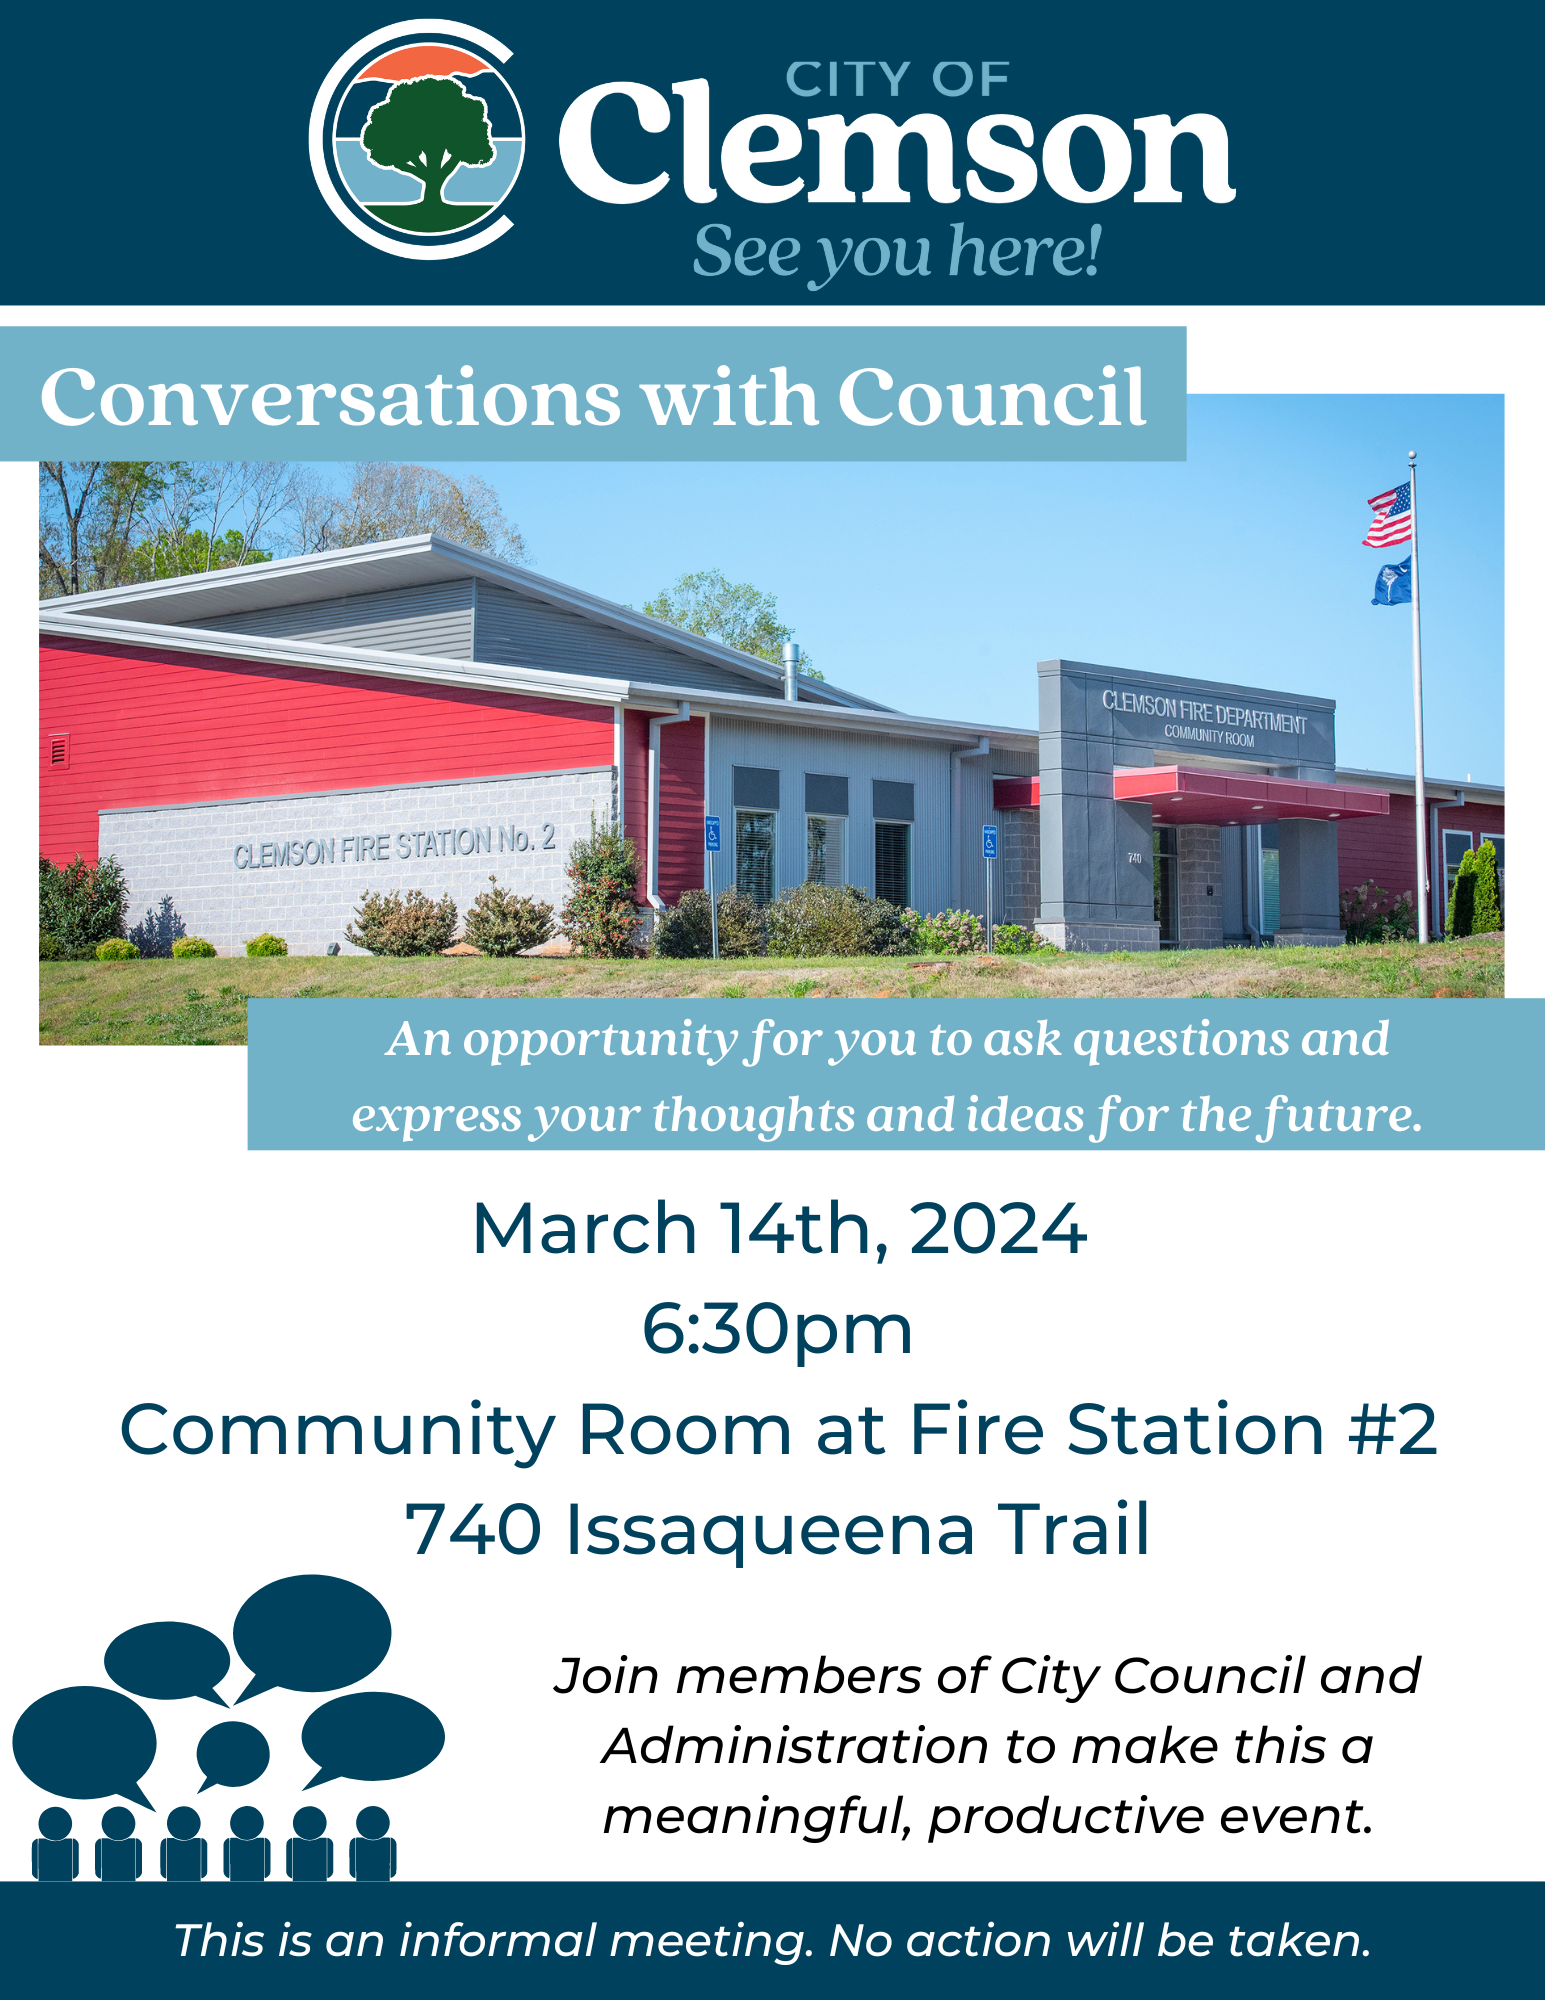 March 14th 6:30pm at Fire Station Community Room